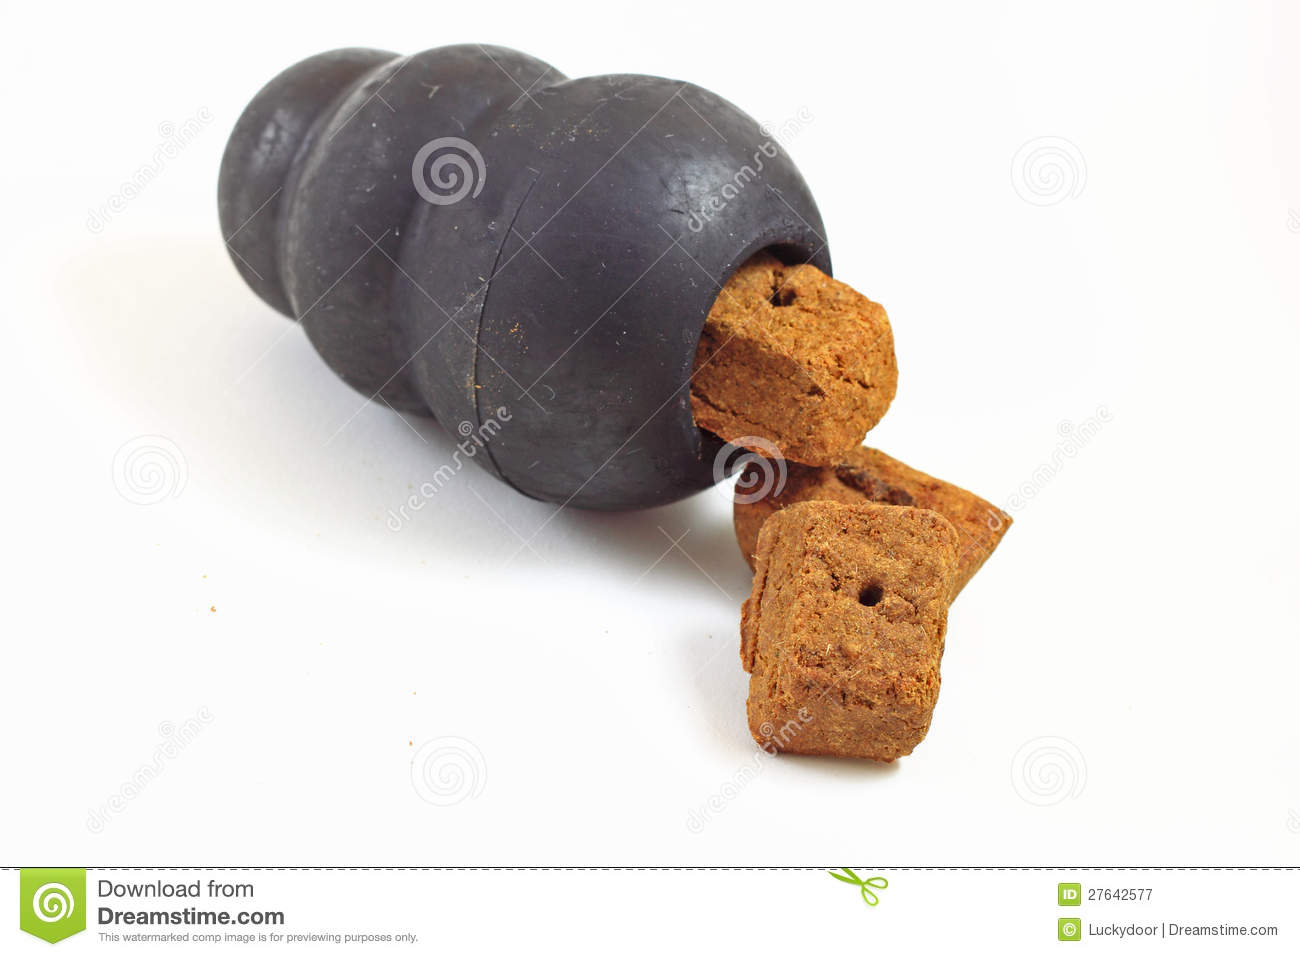 Dog Toy With Treats Royalty Free Stock Photography   Image  27642577